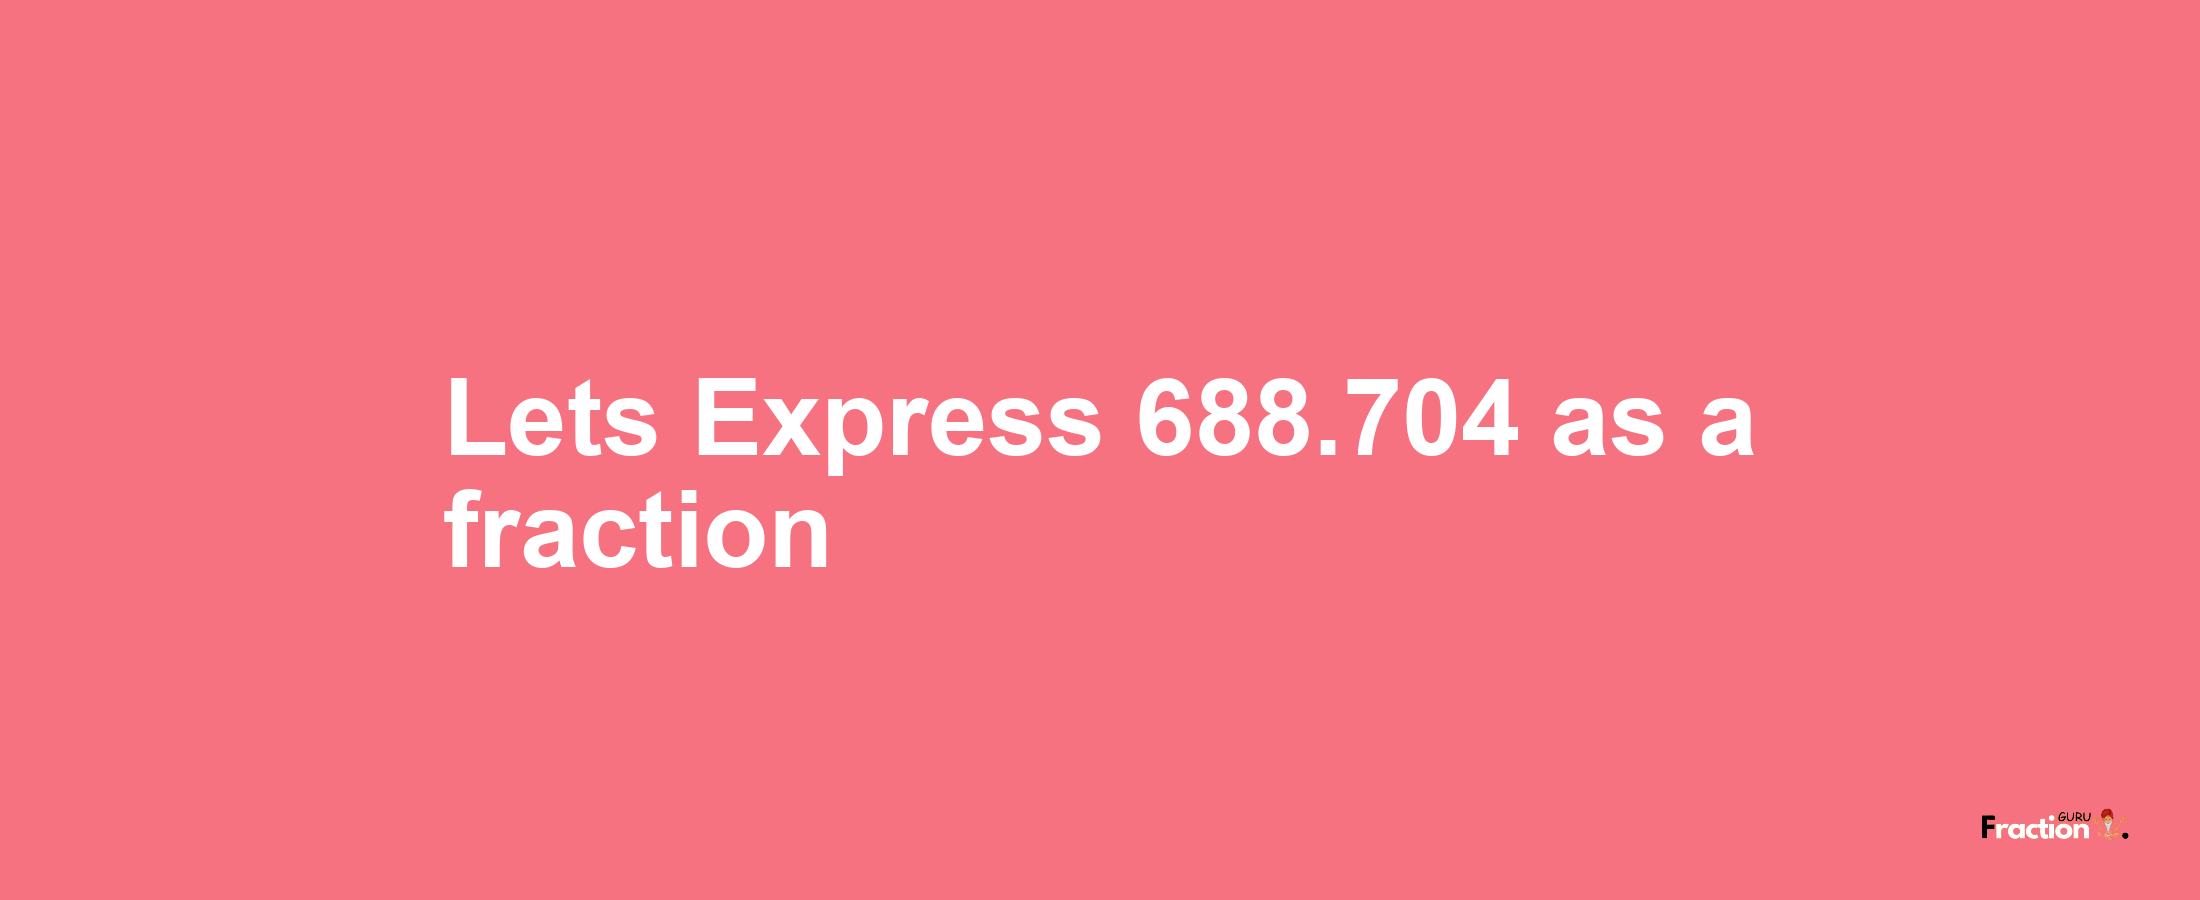 Lets Express 688.704 as afraction